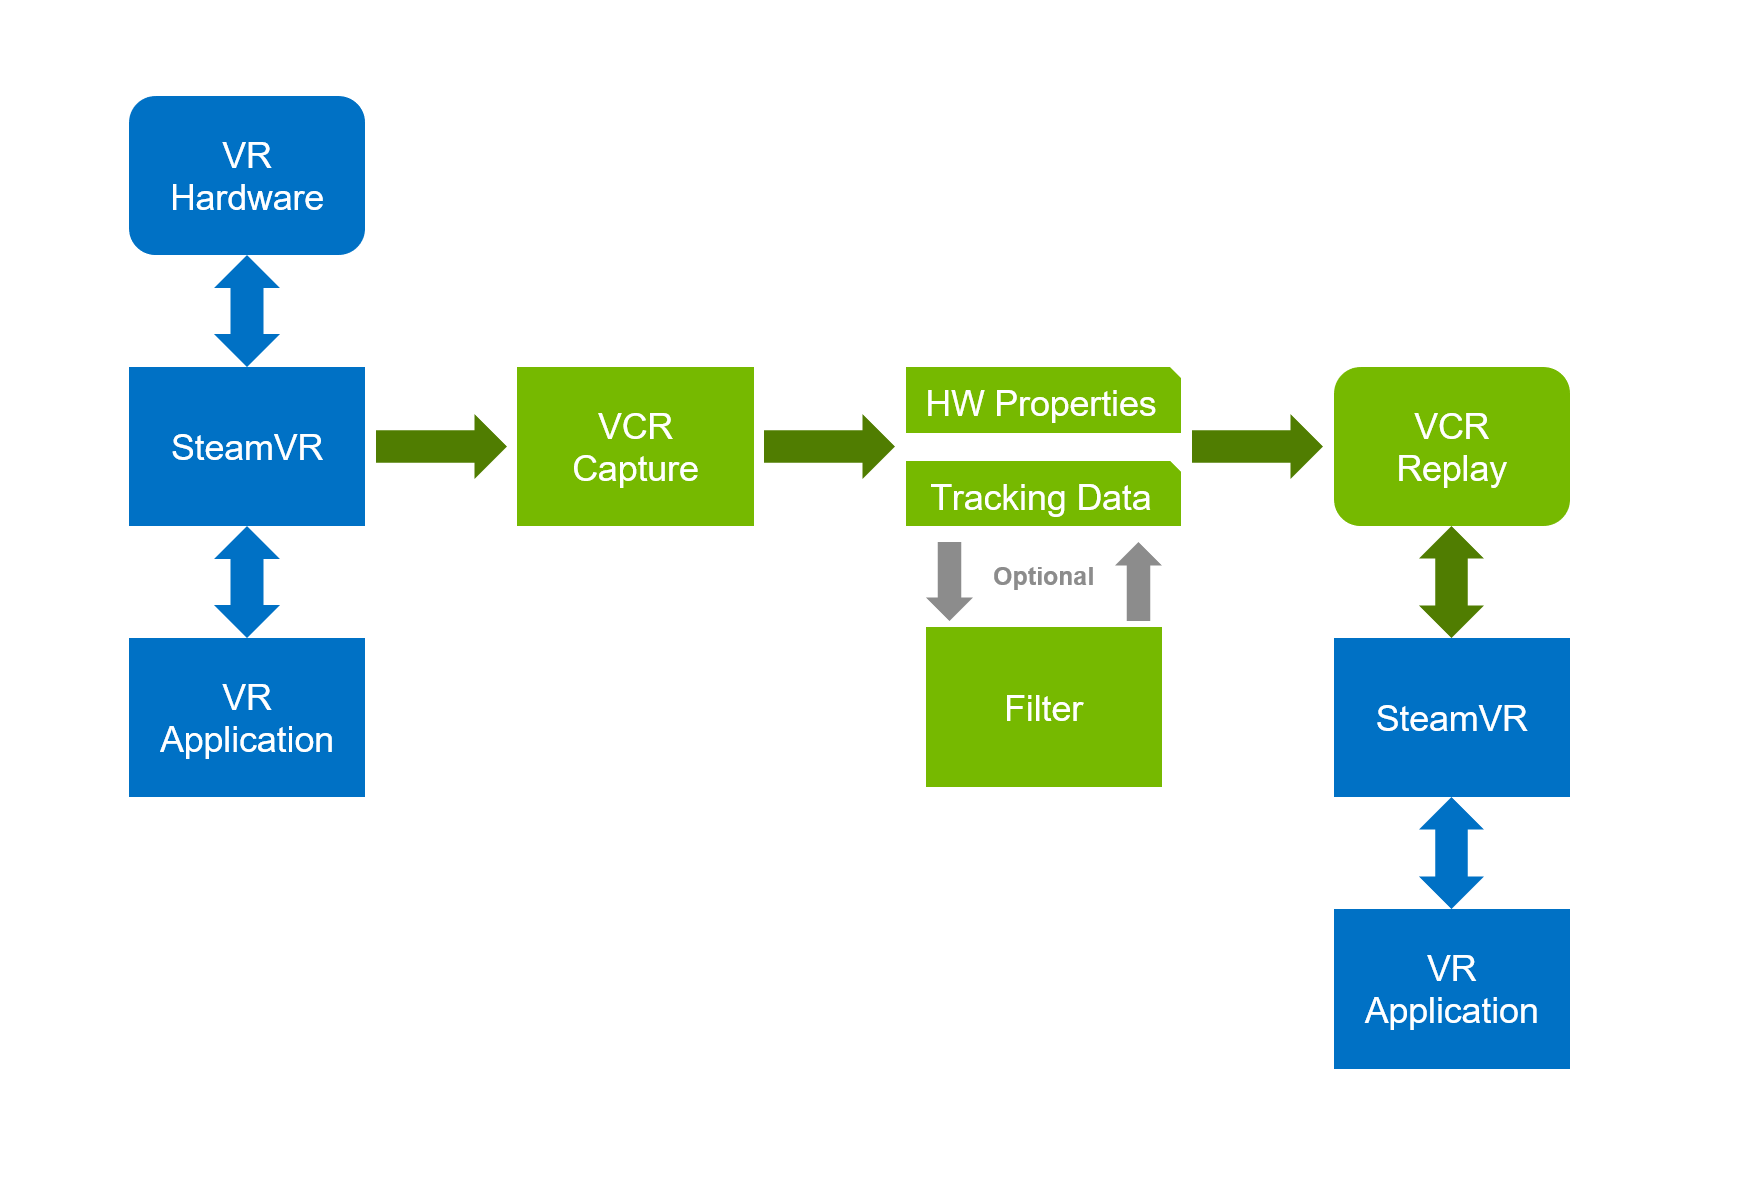 Diagram detailing the VCR workflow of capturing, filtering, and replaying VR content.